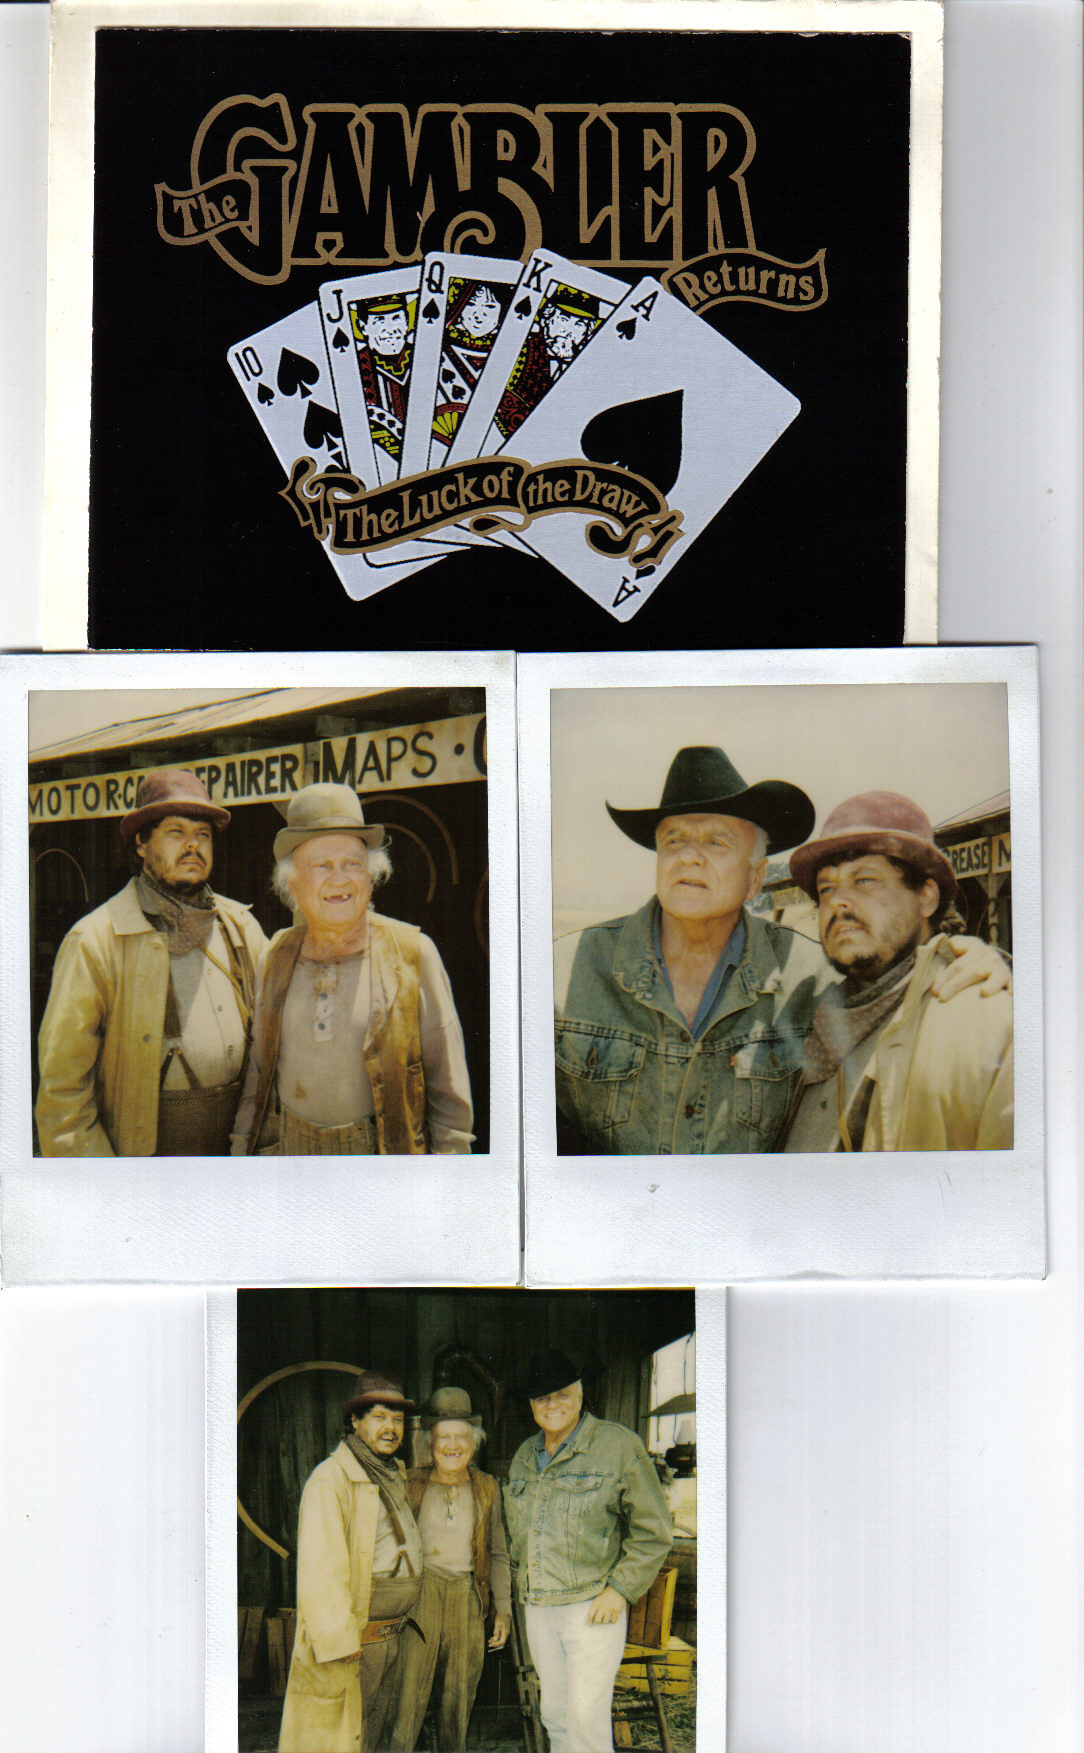 Dell Yount (Elroy) with Dub Taylor & Brian Keith in The Gambler Returns: Luck of the Draw, Directed by Dick Lowry.